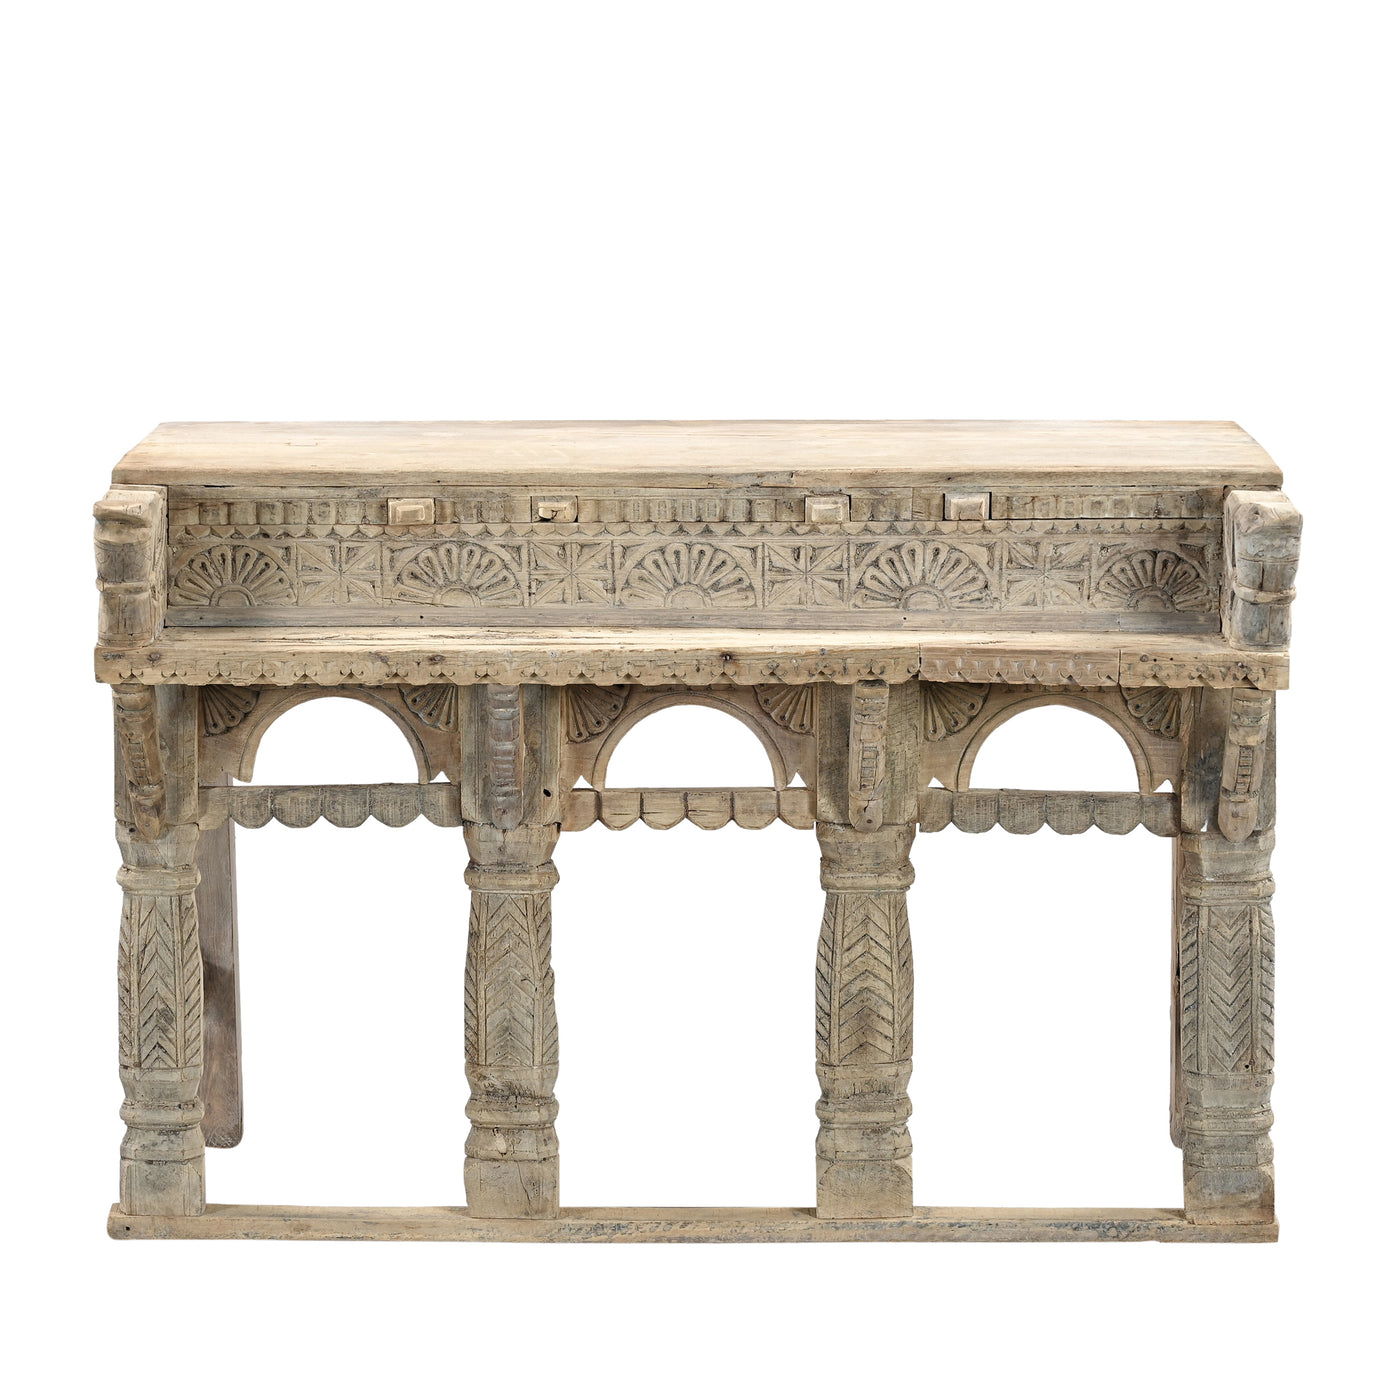 Surjara - old wooden console